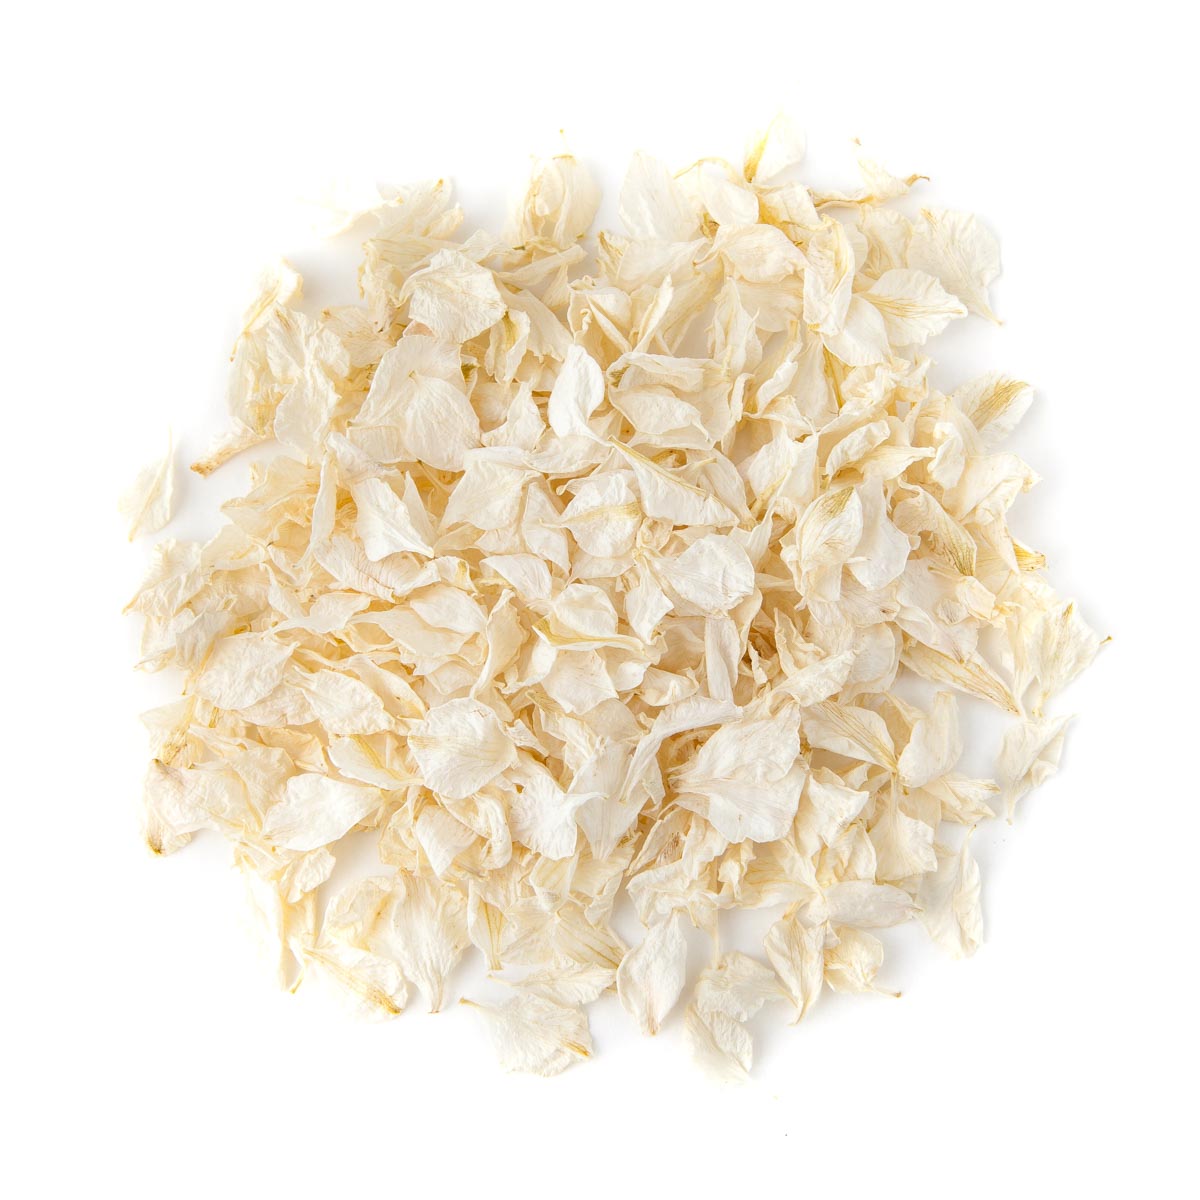 Biodegradable Delphinium WEDDING CONFETTI Dried IVORY FLUTTER FALL Real Petals 